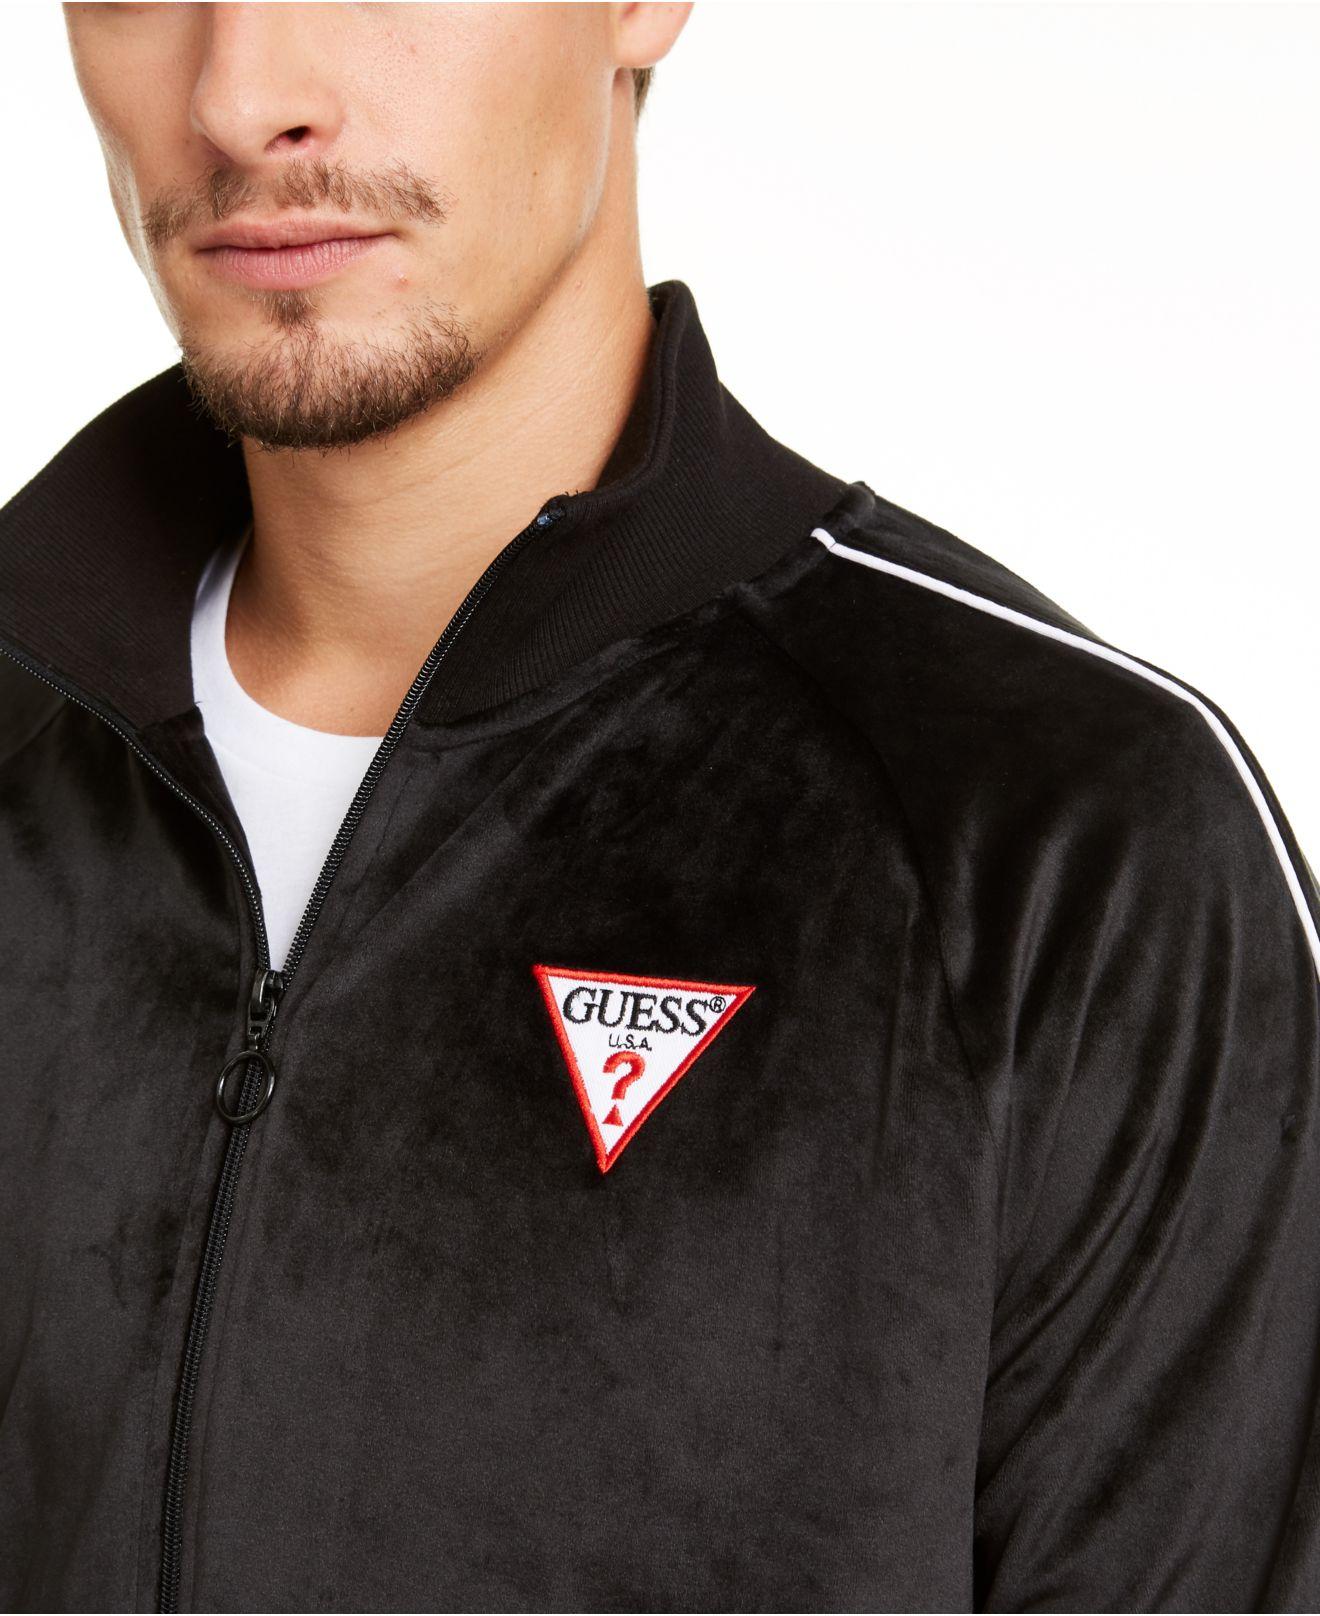 Guess Synthetic Alameda Velour Track Jacket in Black for Men - Lyst